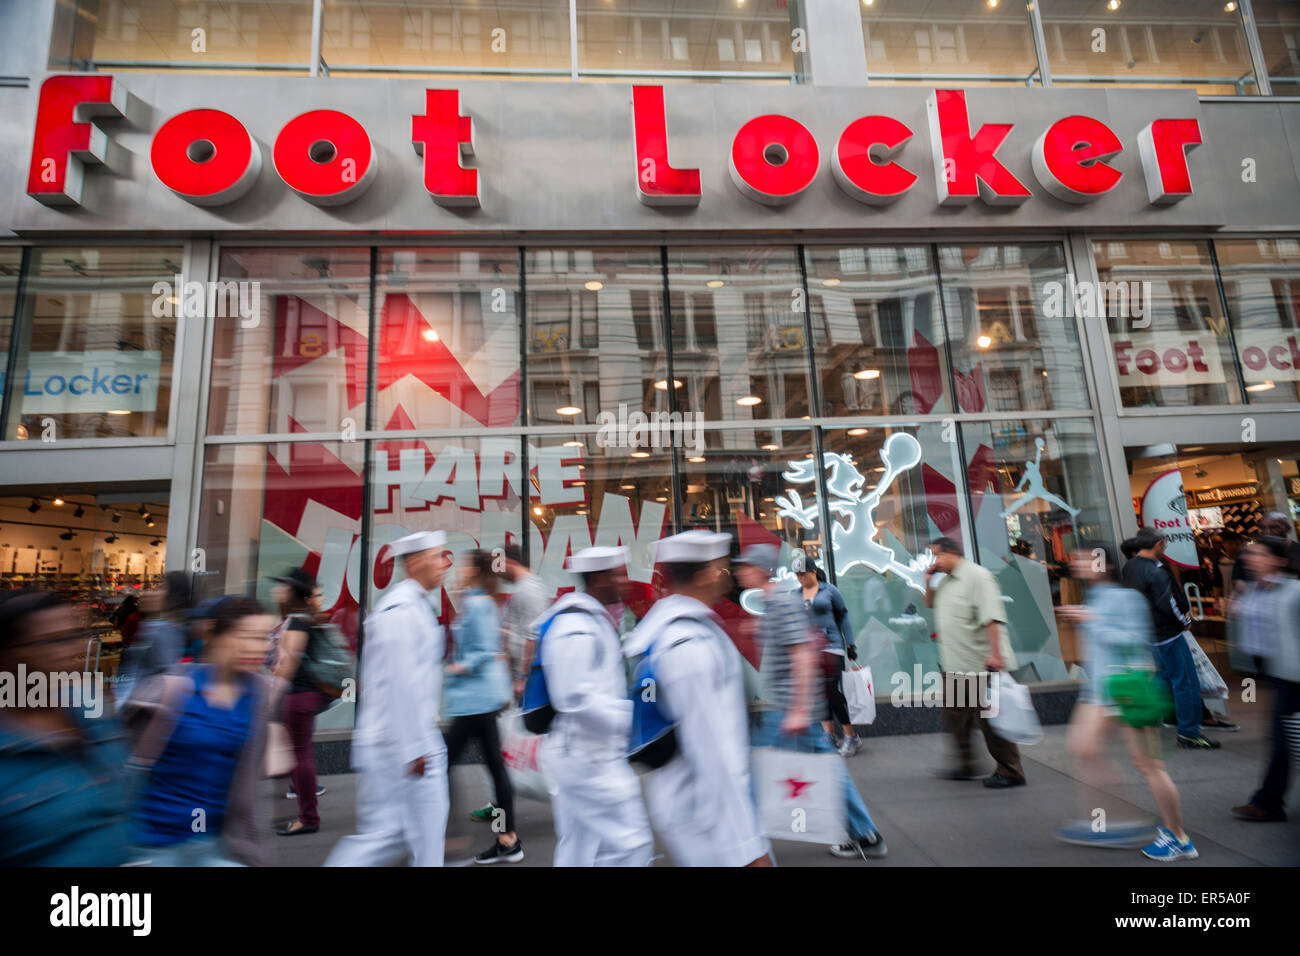 A Foot Locker store in Herald Square in New York is seen on Friday, May 22, 2015. Foot Locker announced a 14% increase in first quarter profit. Increased interest in athleisure wear has driven customers into the stores where they eventually buy shoes. Athletic footwear accounts for three-quarters of their sales.  (© Richard B. Levine) Stock Photo